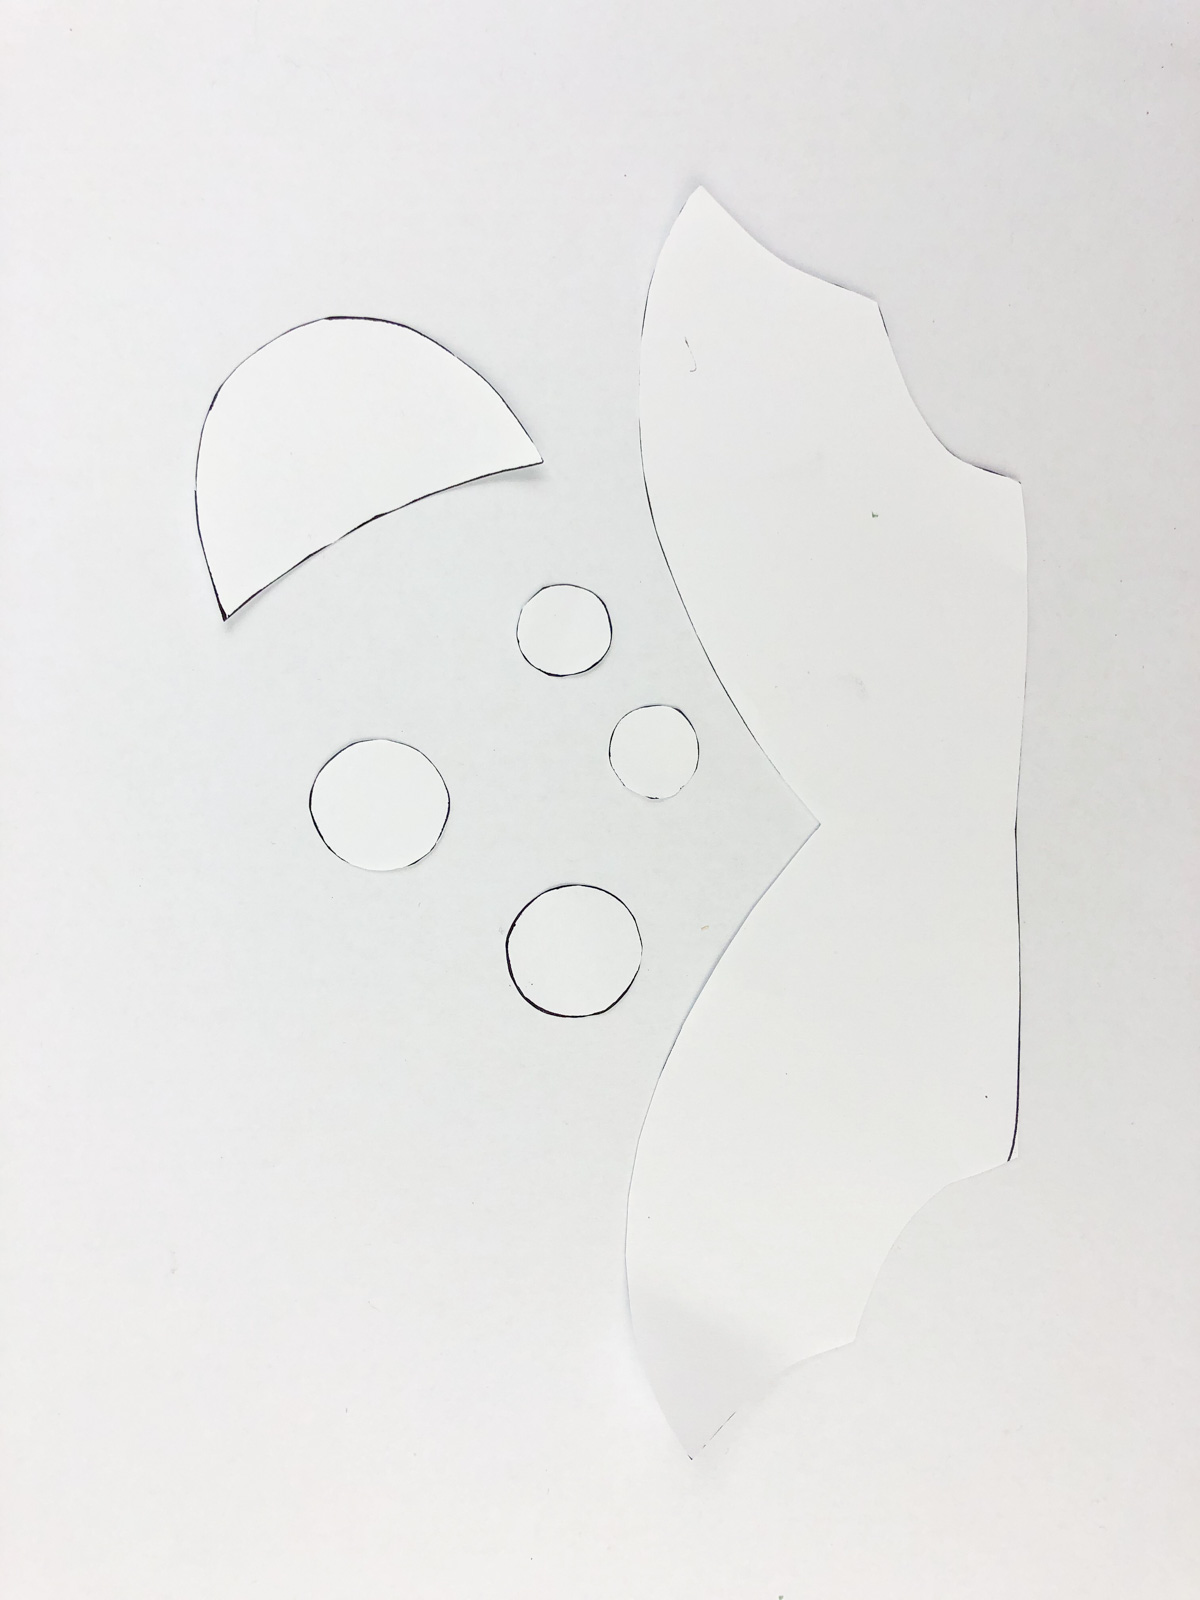 pieces of white paper cut into shapes